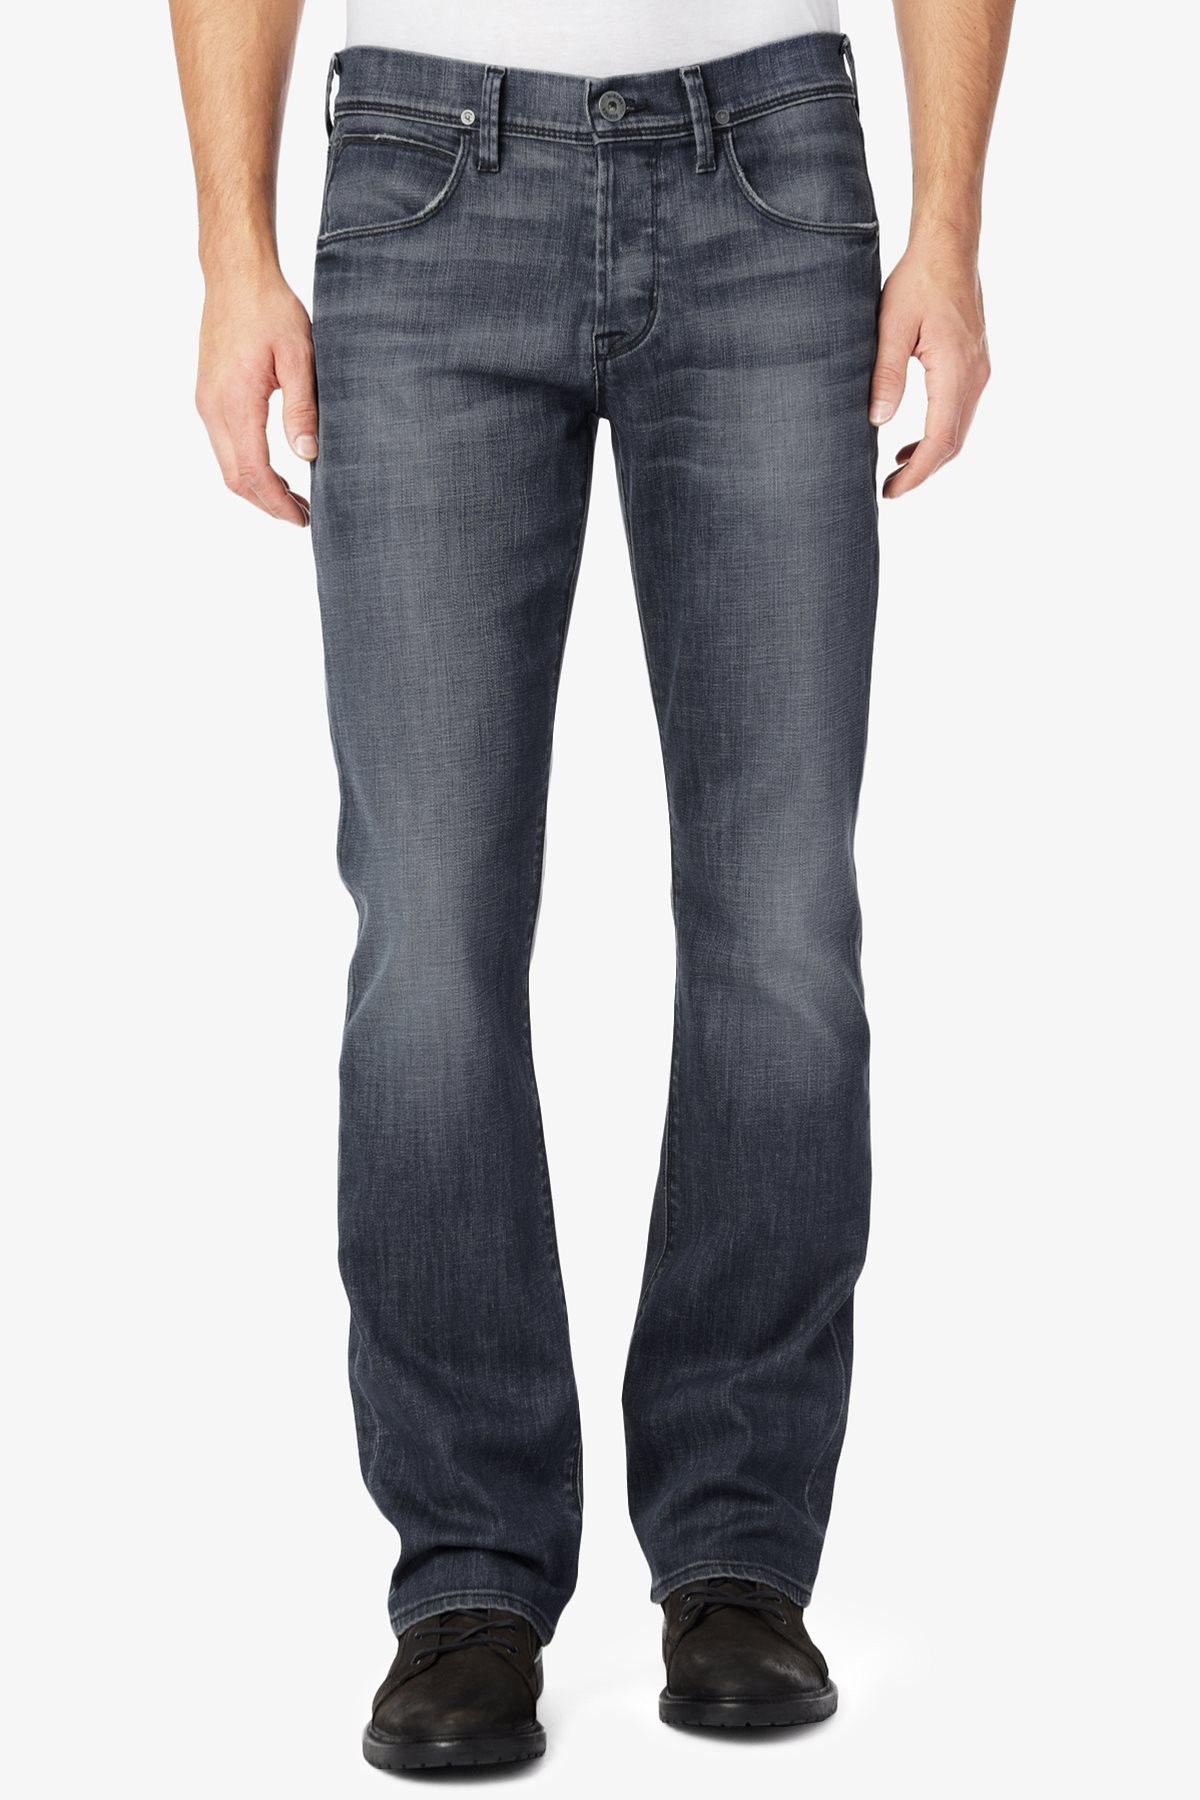 Lyst - Hudson Jeans Clifton Bootcut in Blue for Men